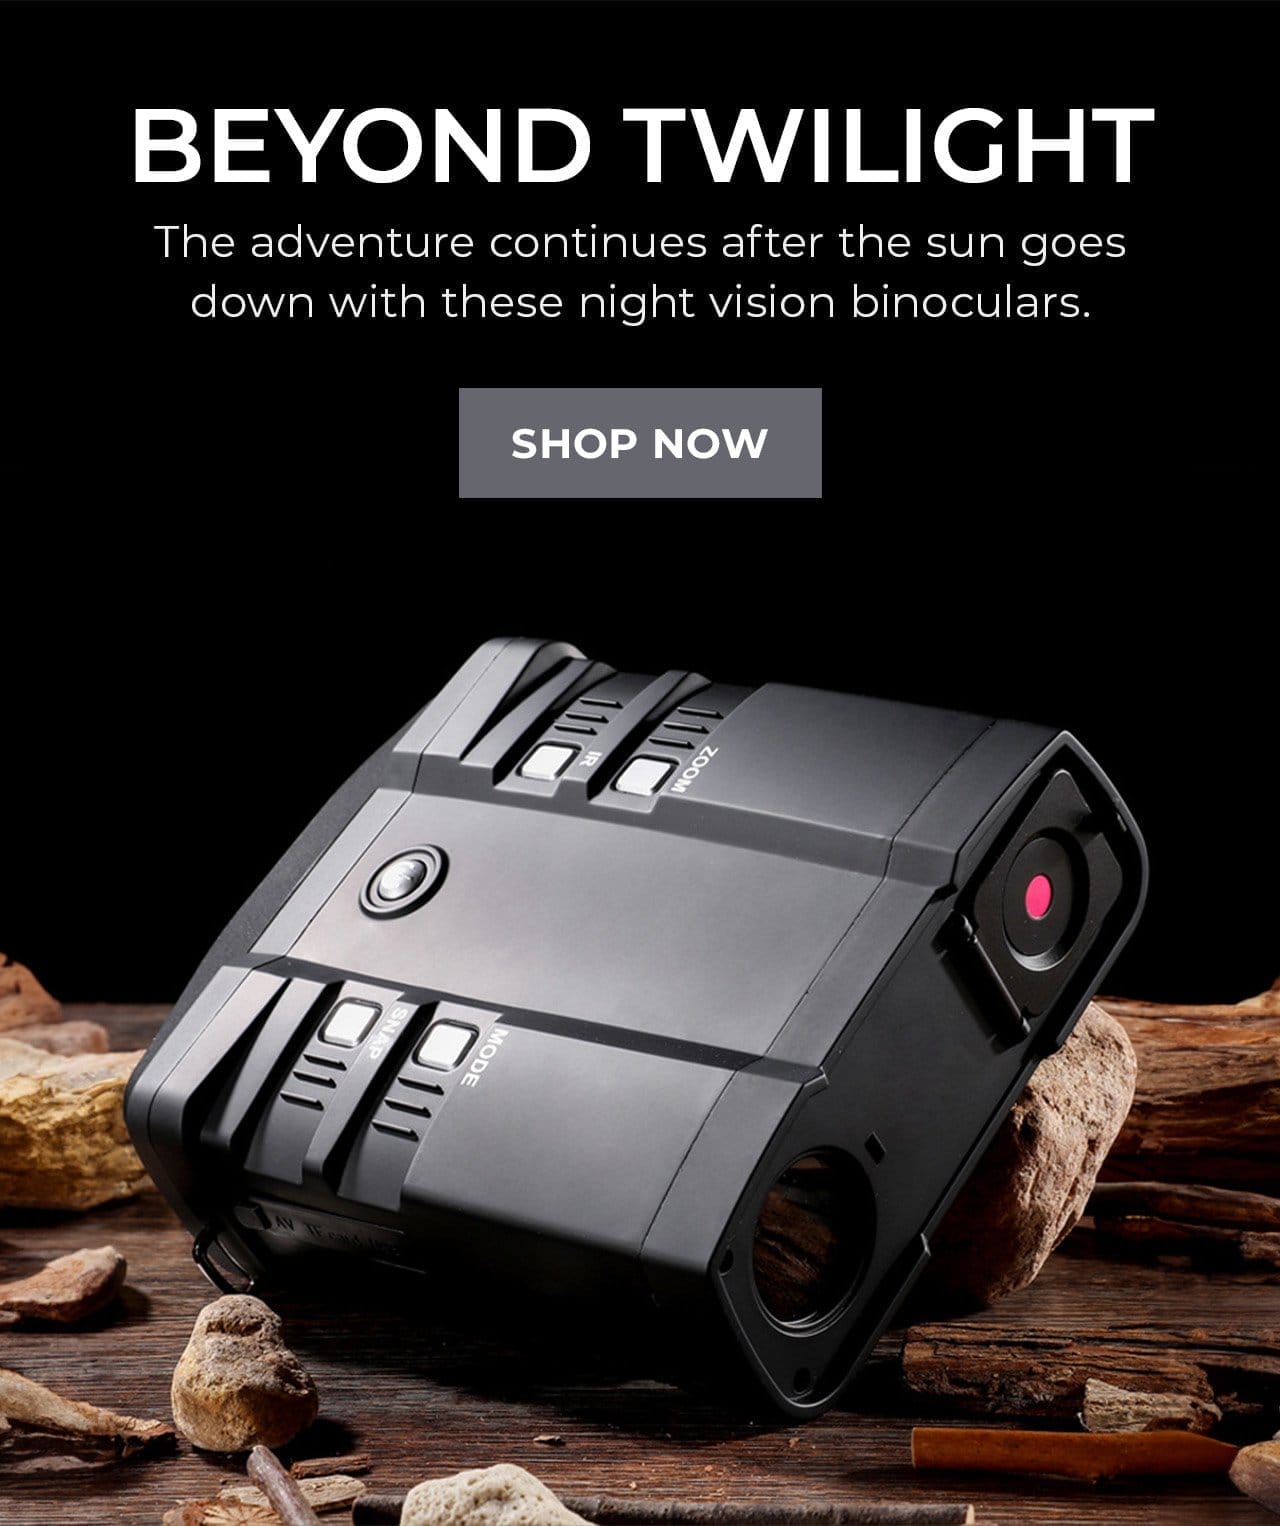 HD Infrared Night Vision | SHOP NOW